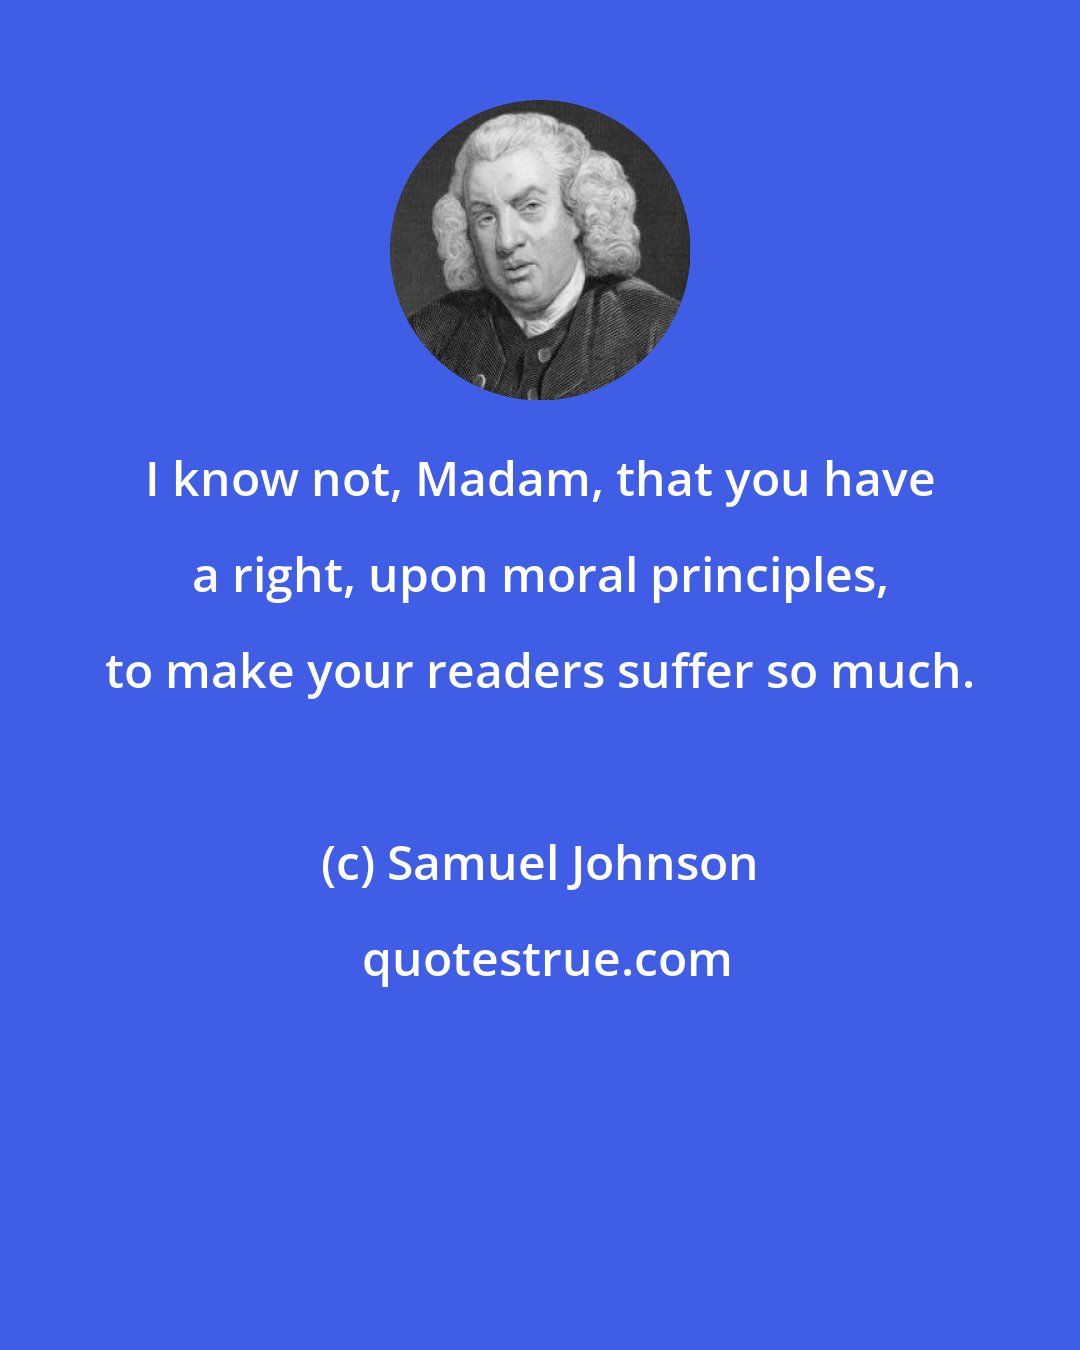 Samuel Johnson: I know not, Madam, that you have a right, upon moral principles, to make your readers suffer so much.